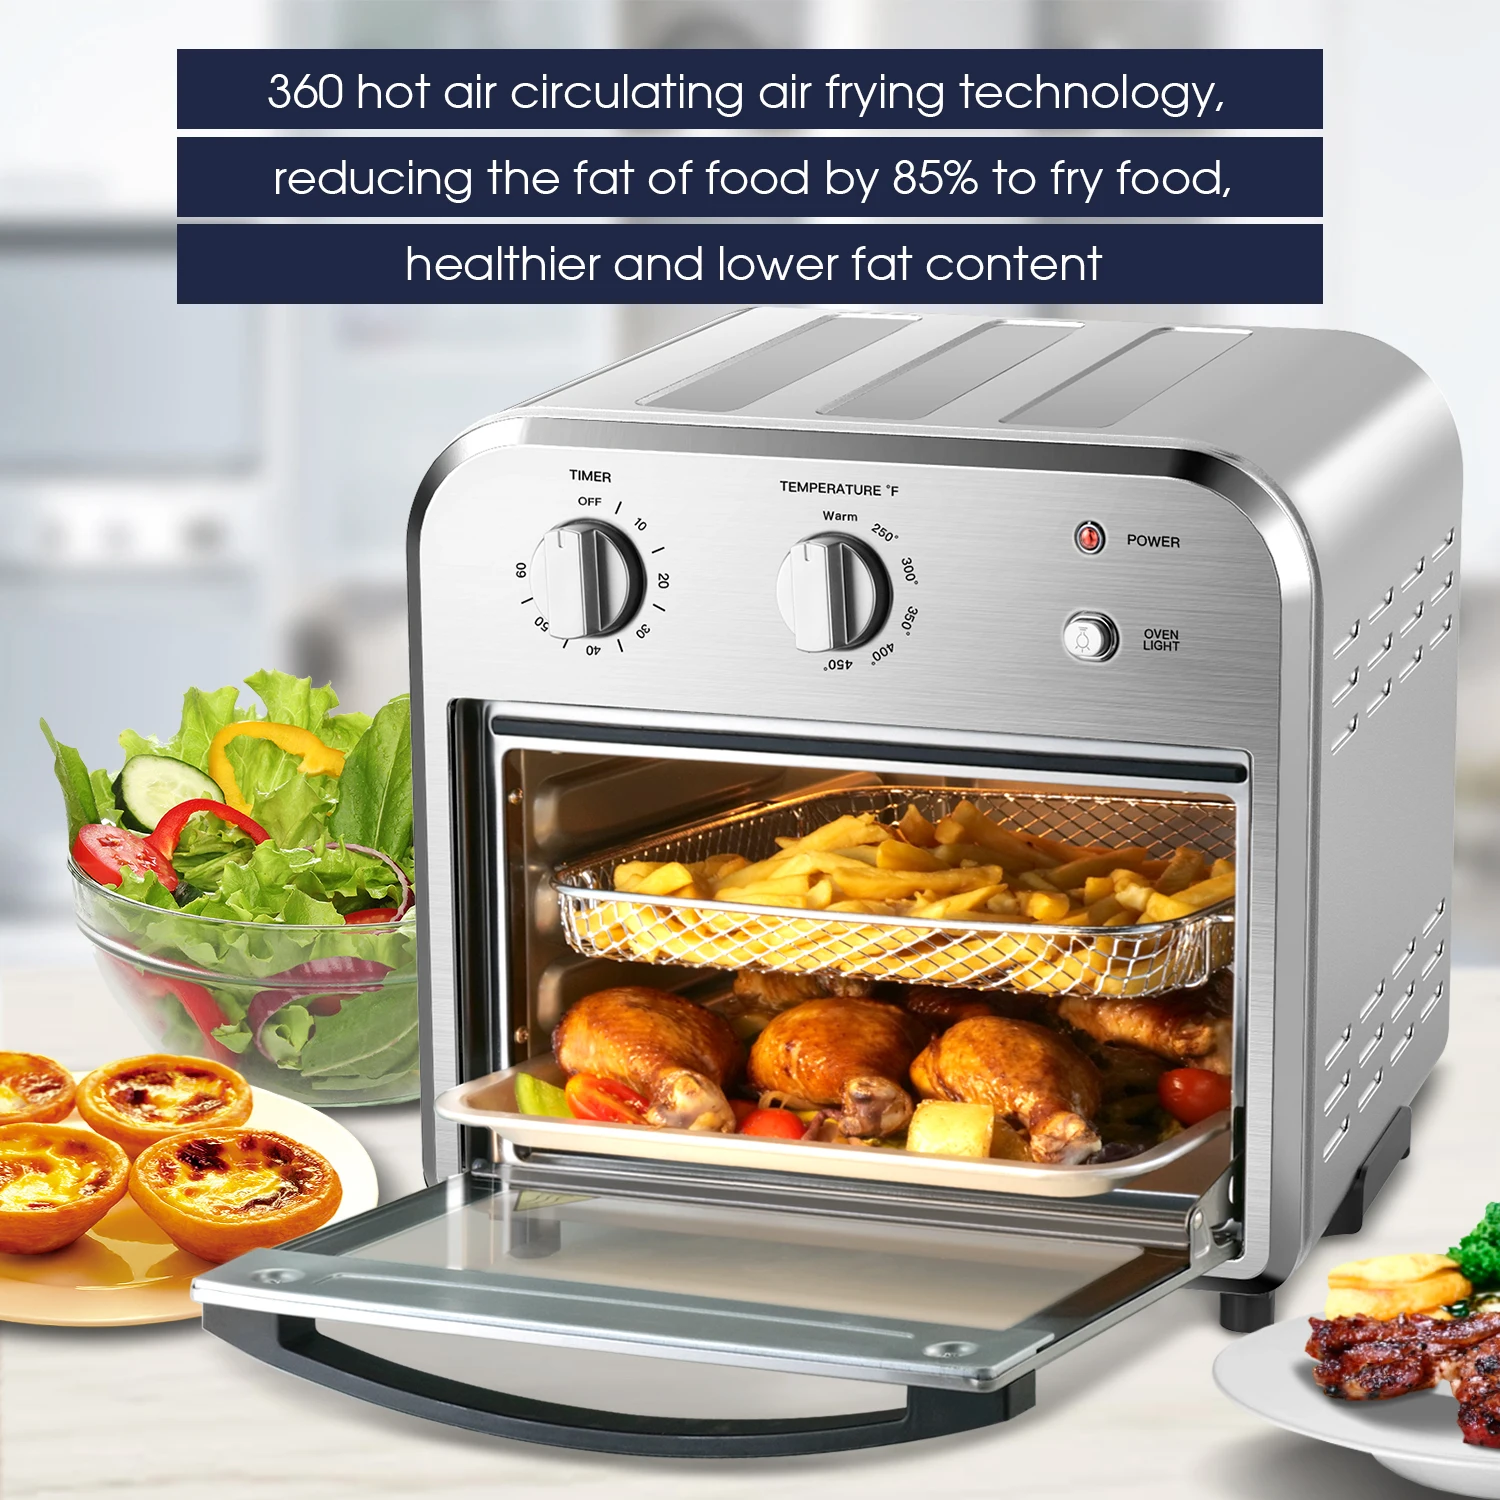 10 Liter Air Oven ， Air Fryer，Multifunctional oven，Healthy and oil free